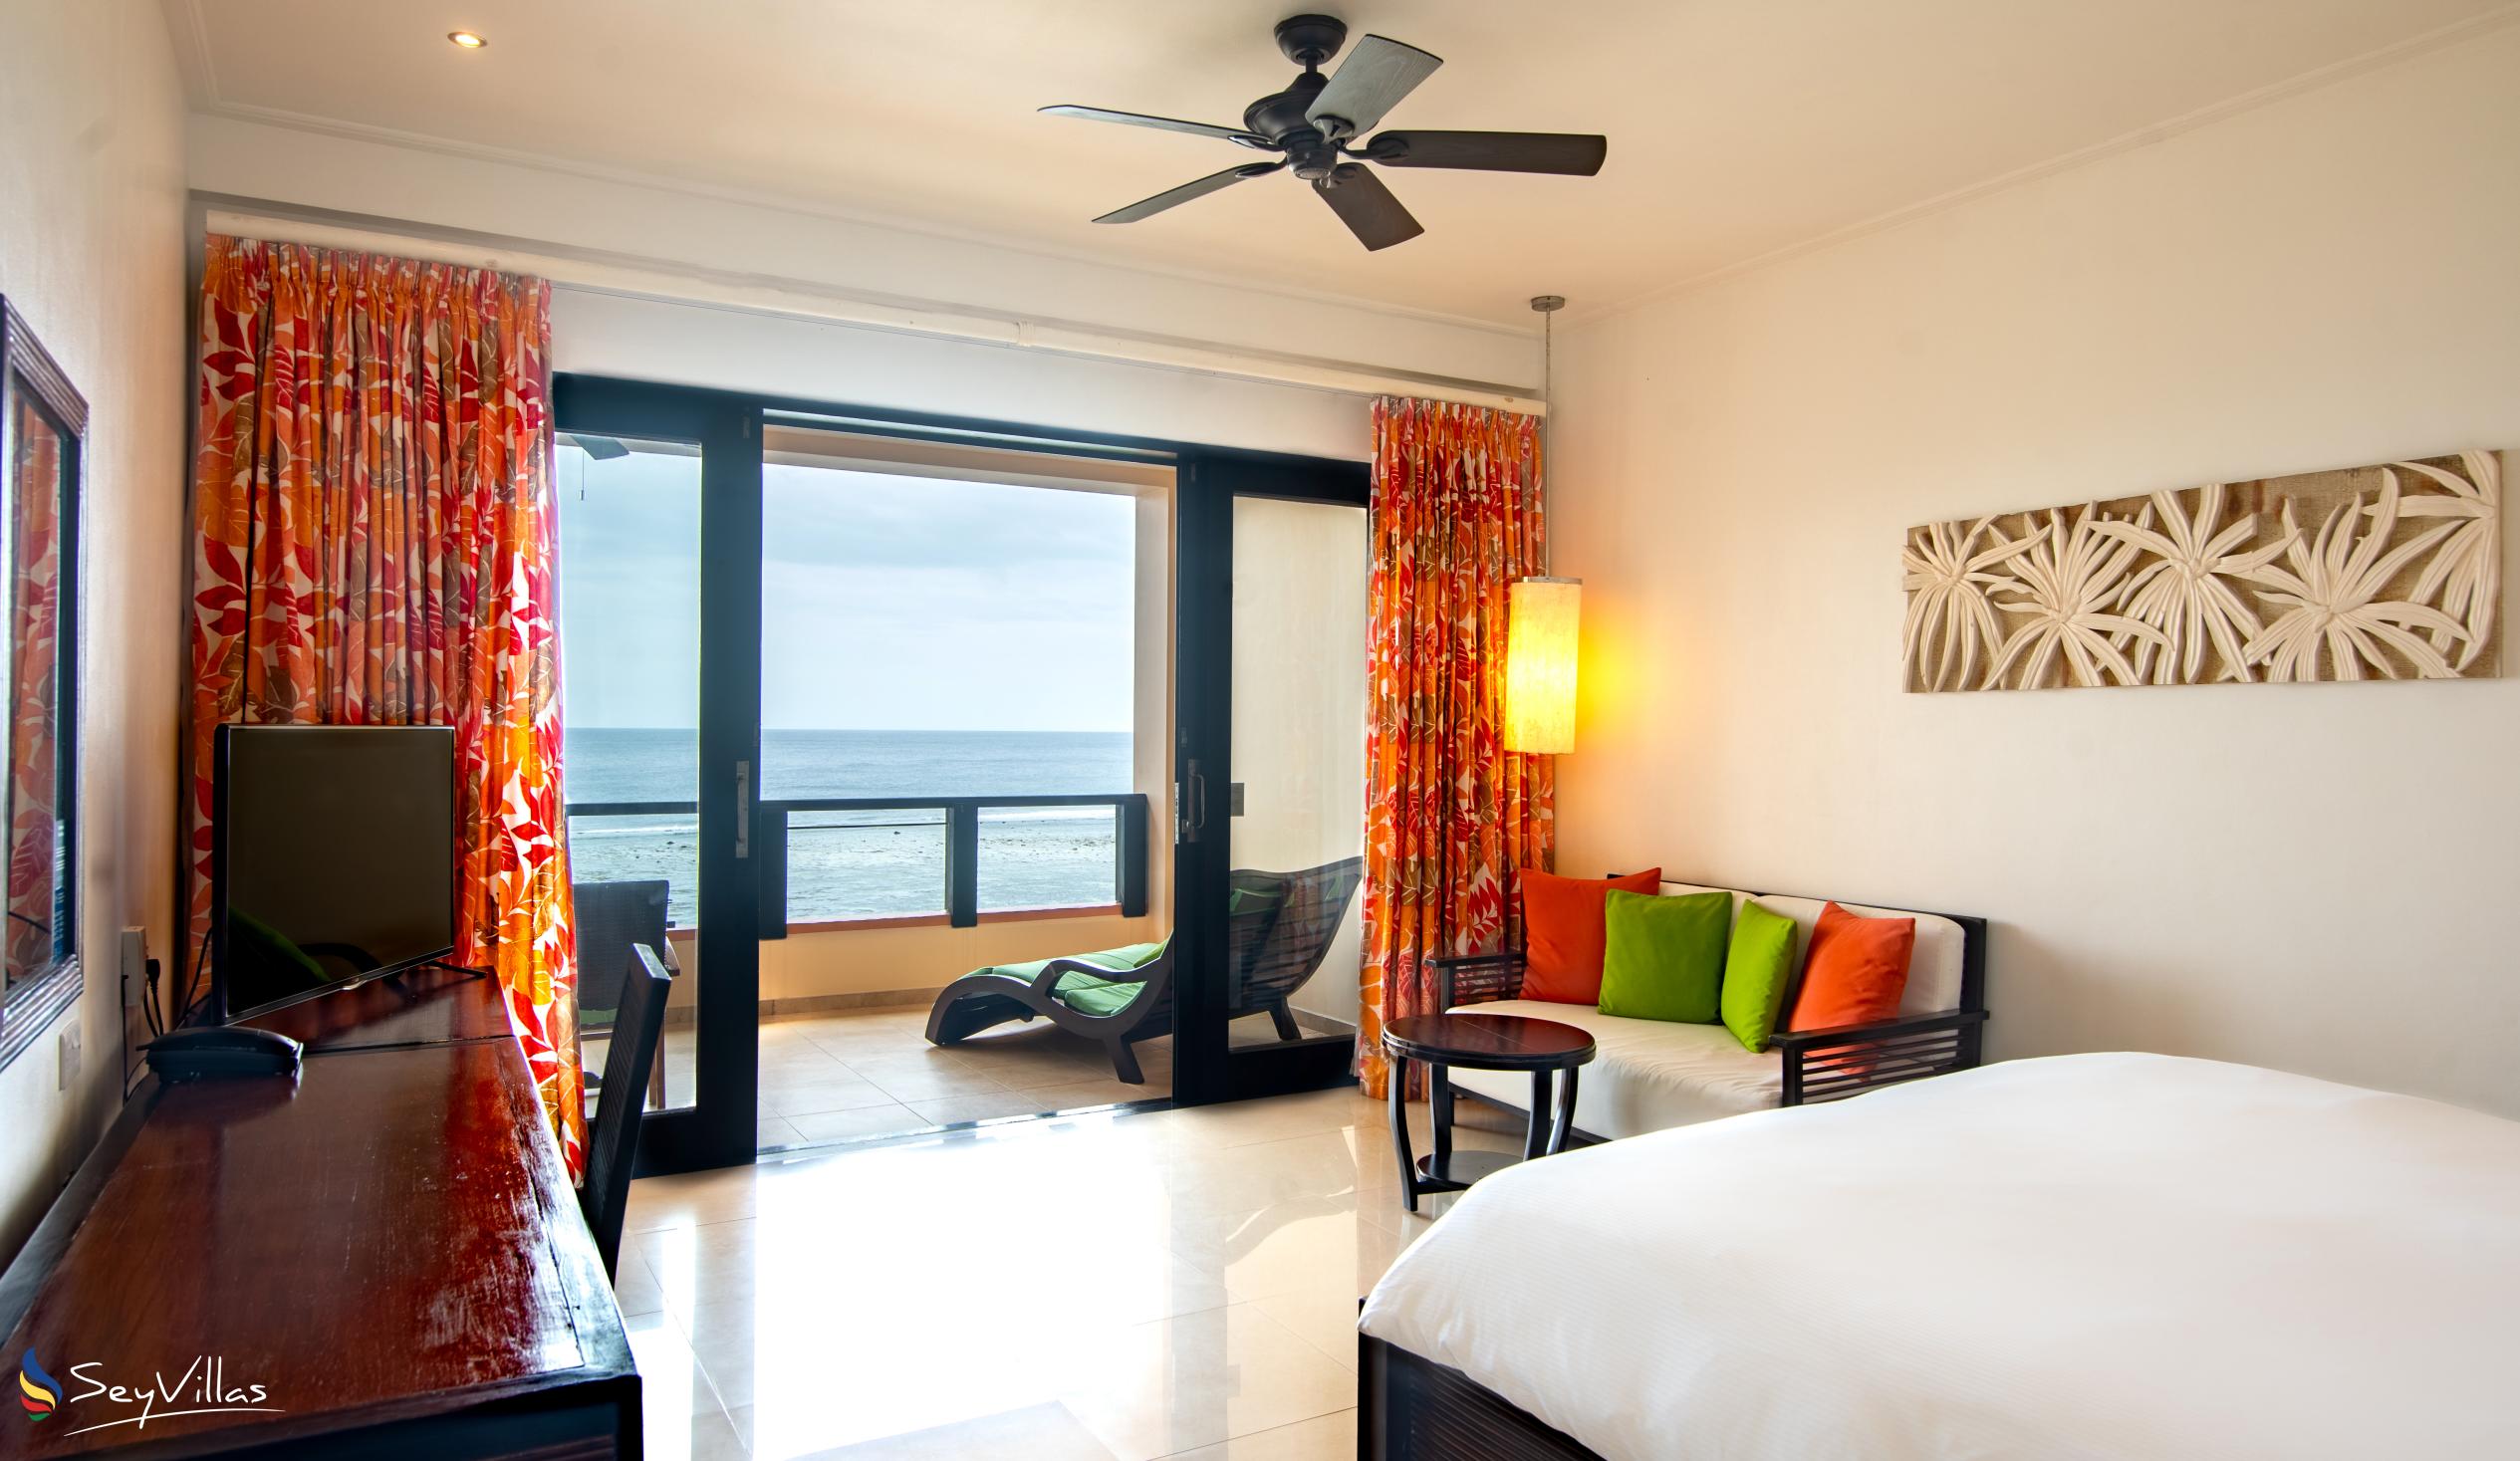 Photo 89: Double Tree by Hilton - Allamanda Resort & Spa - King Grand Deluxe Room with Ocean View - Mahé (Seychelles)